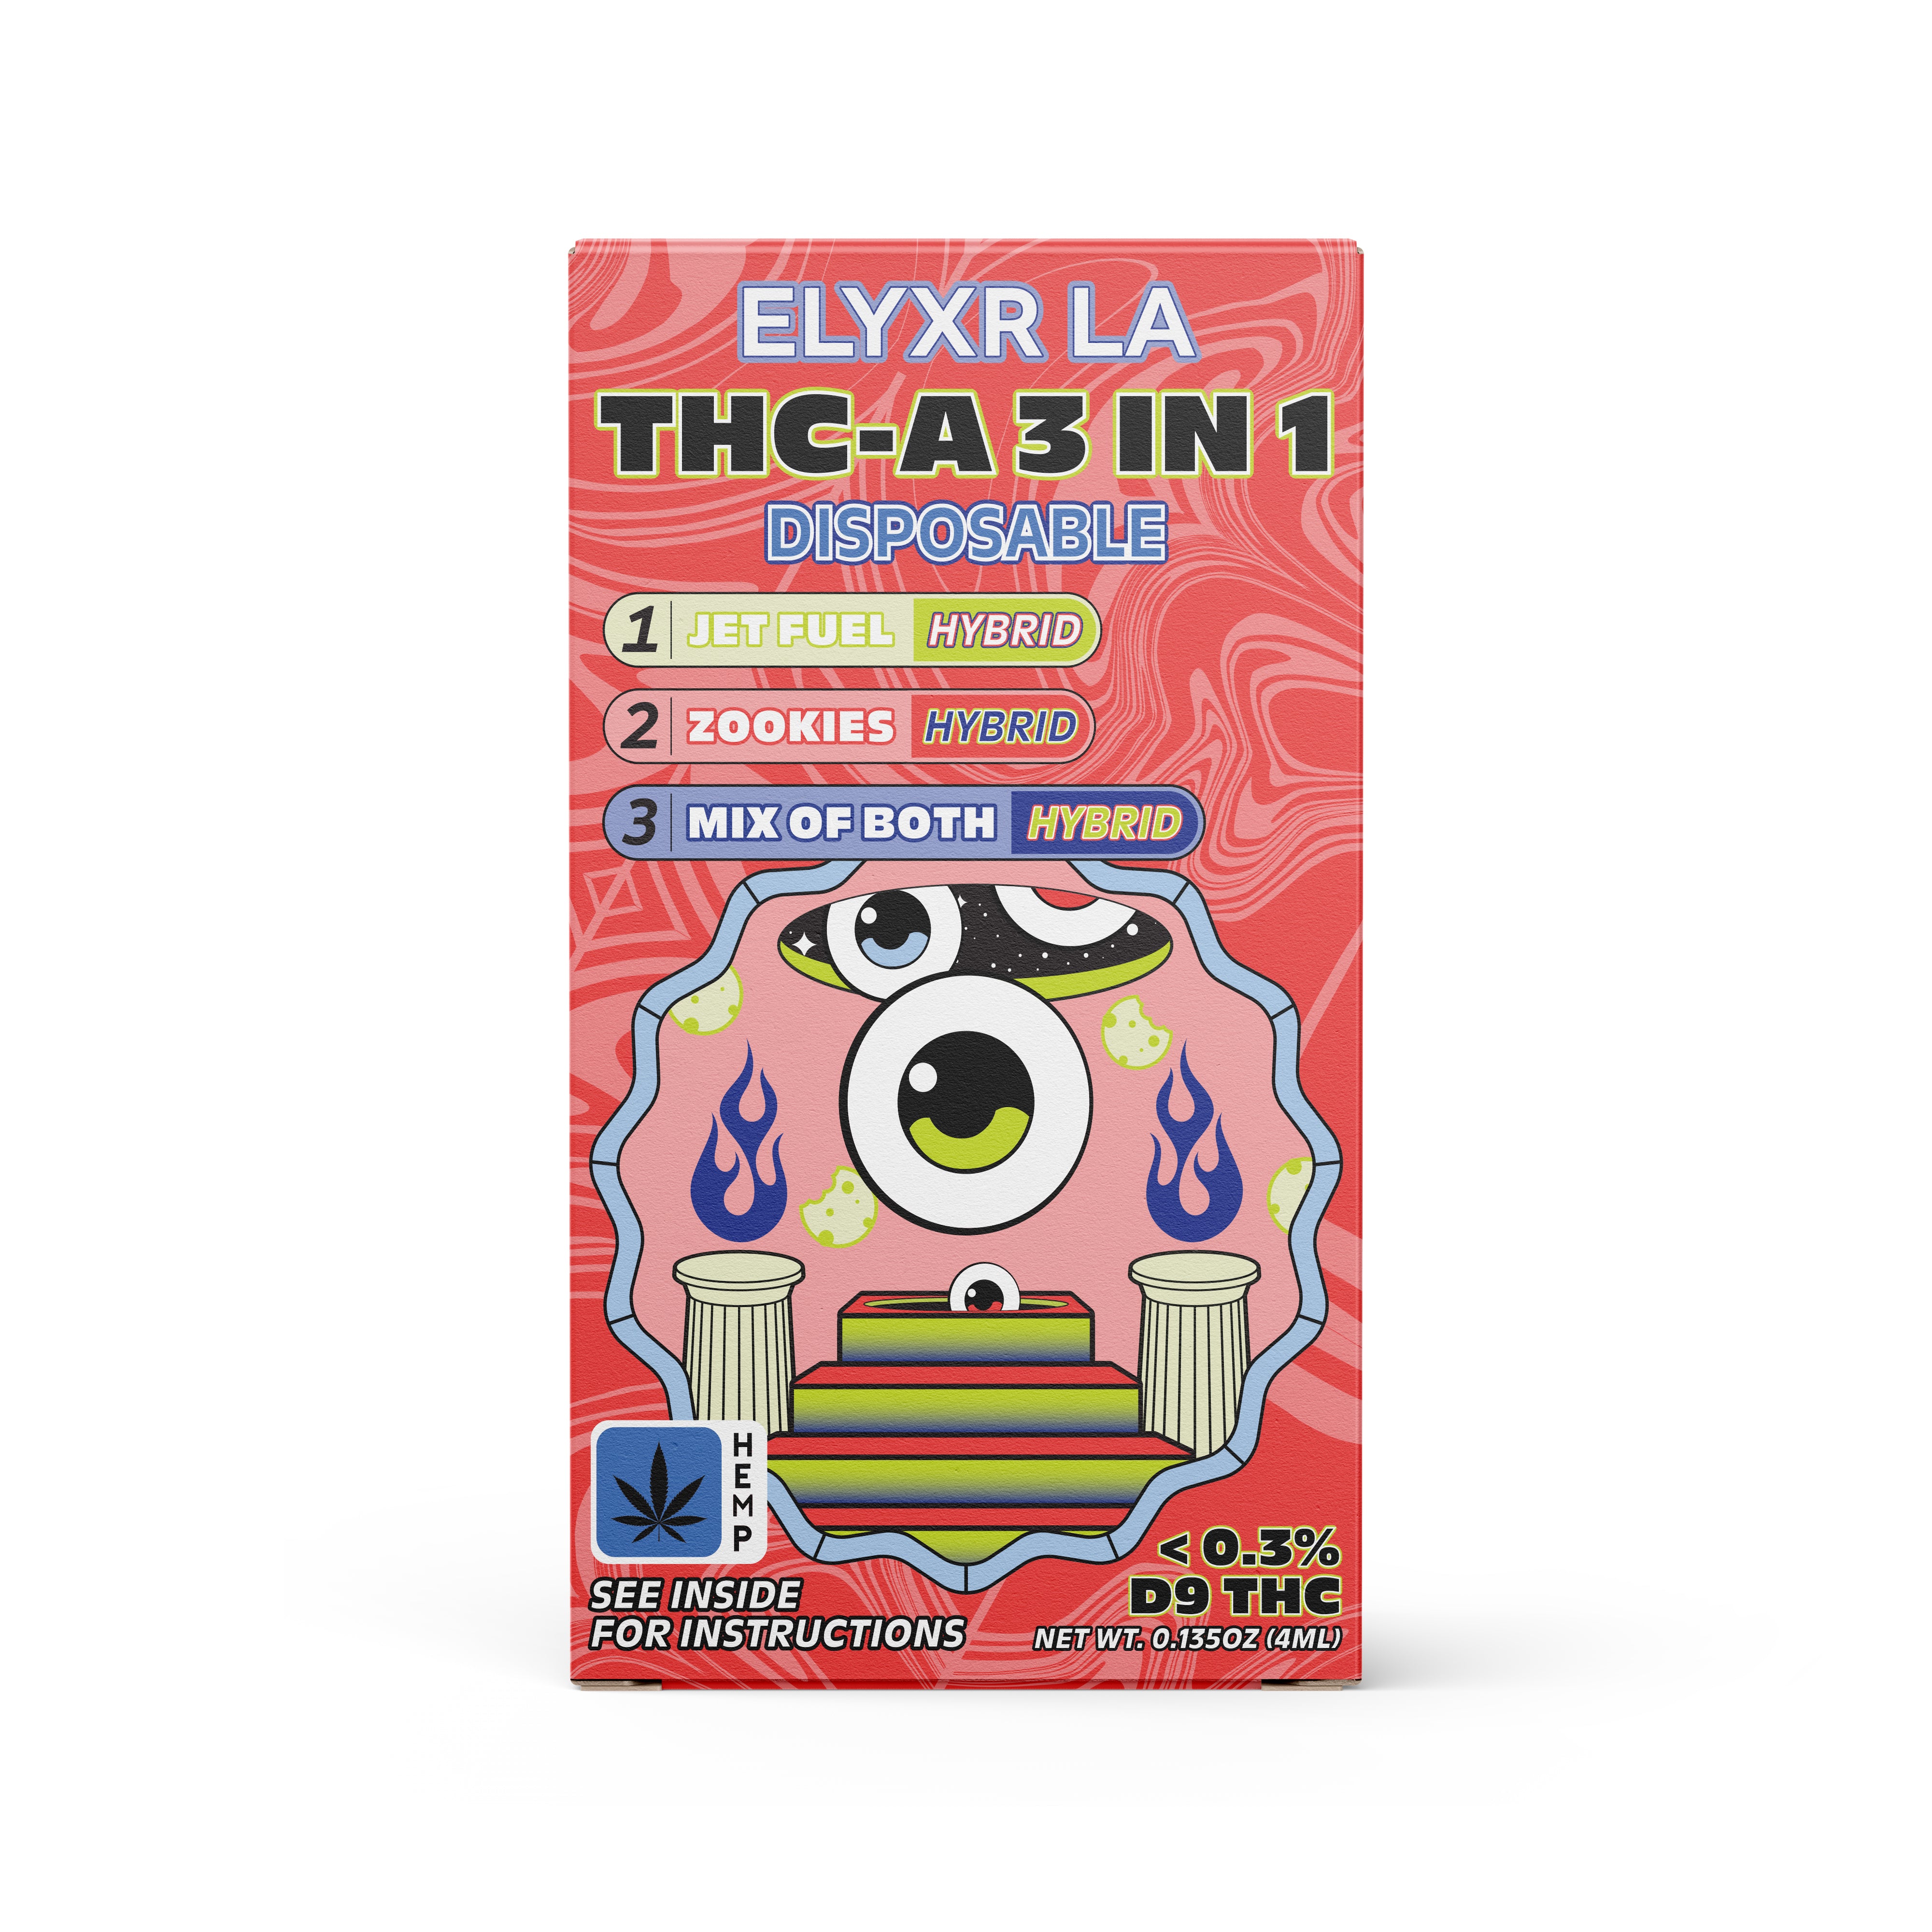 THC-A 3-in-1 Disposable 4 Grams (4000mg)